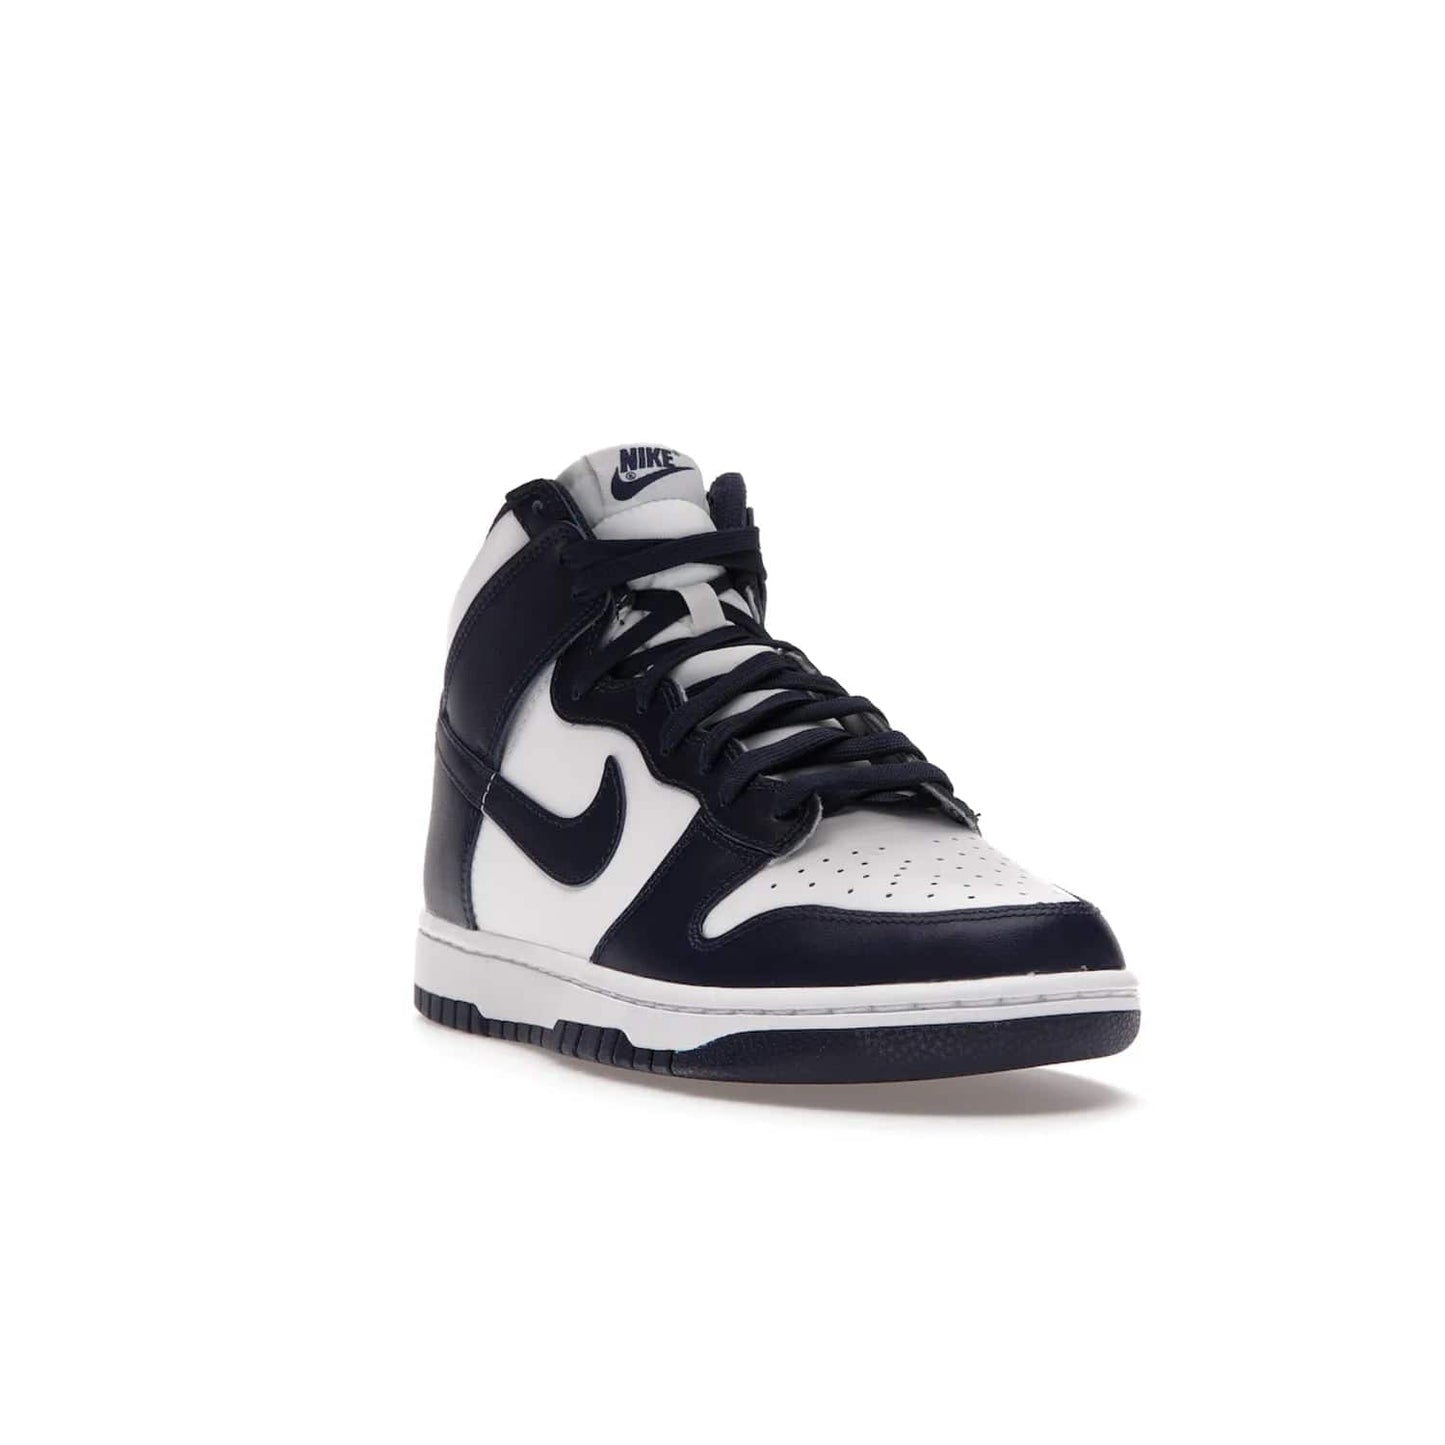 Nike Dunk High Championship Navy - Image 7 - Only at www.BallersClubKickz.com - Classic Nike Dunk High sneaker delivers an unforgettable style with white leather upper, Championship Navy overlays, and matching woven tongue label and sole. Make a statement with the Championship Navy today.